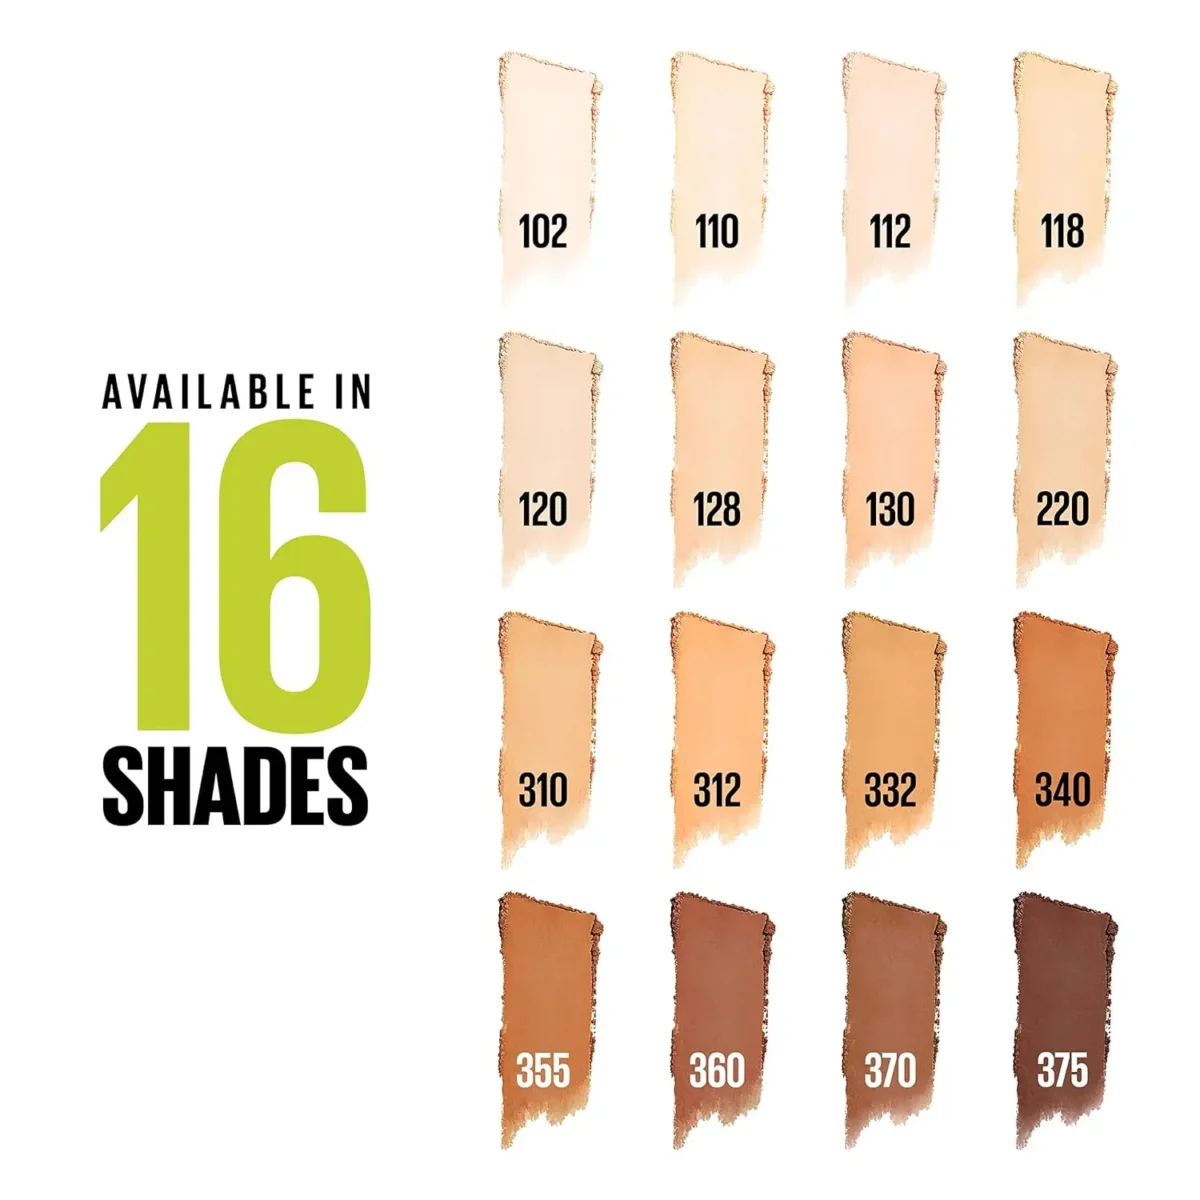 Maybelline Superstay Up To 24Hr Hybrid Powder Foundation All Shades Swatches